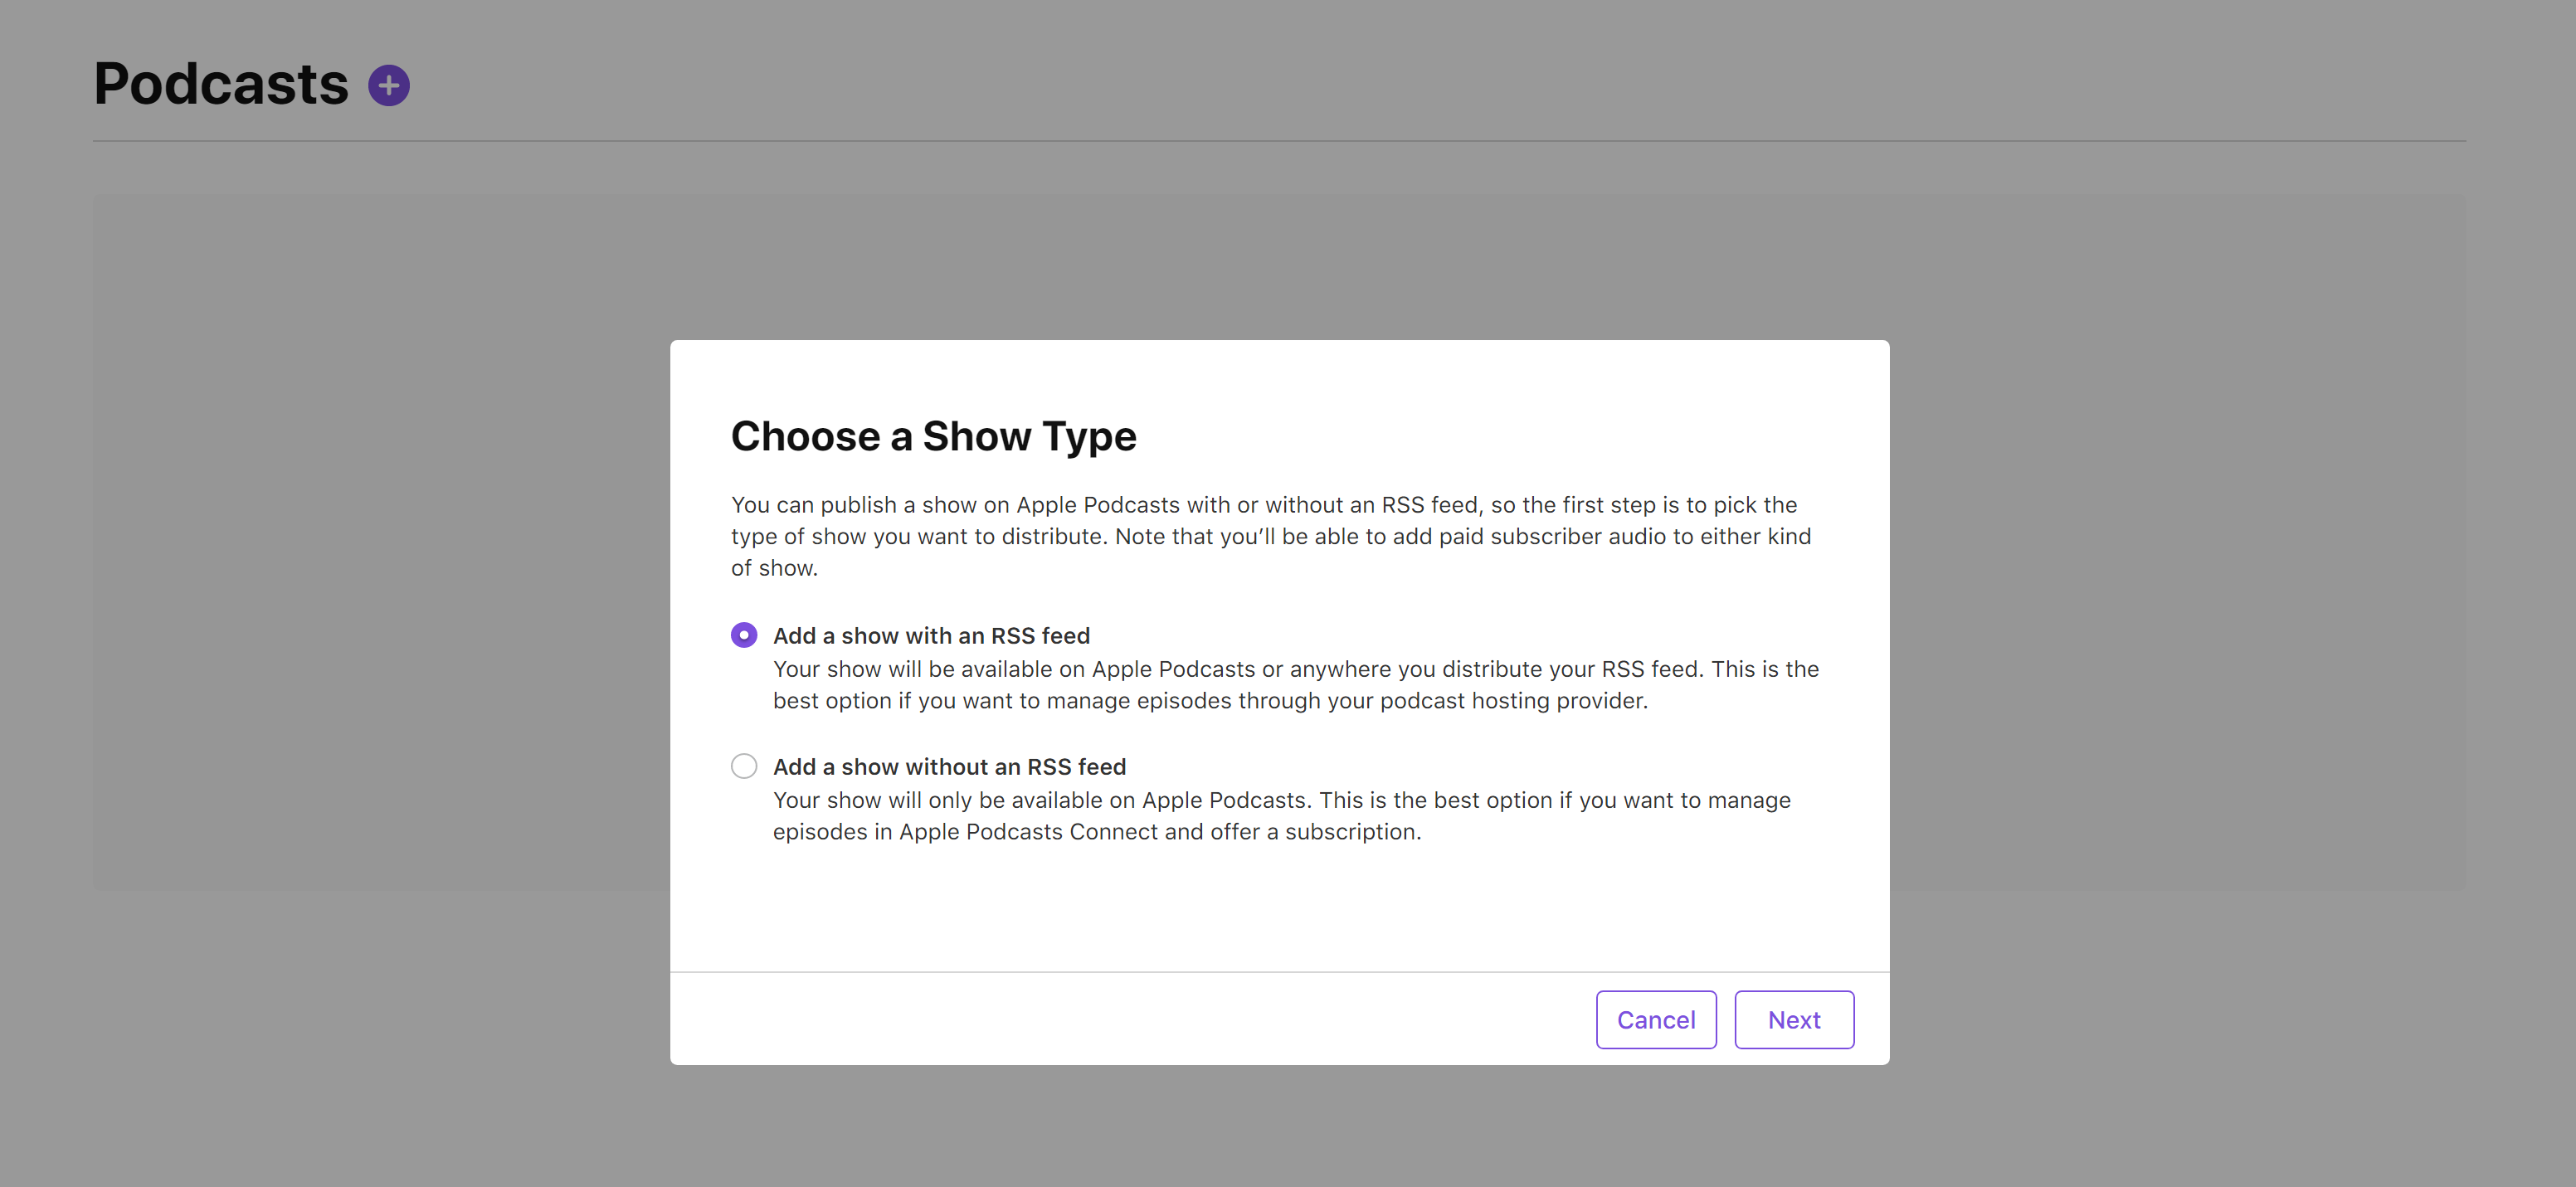 Add a show with an RSS feed